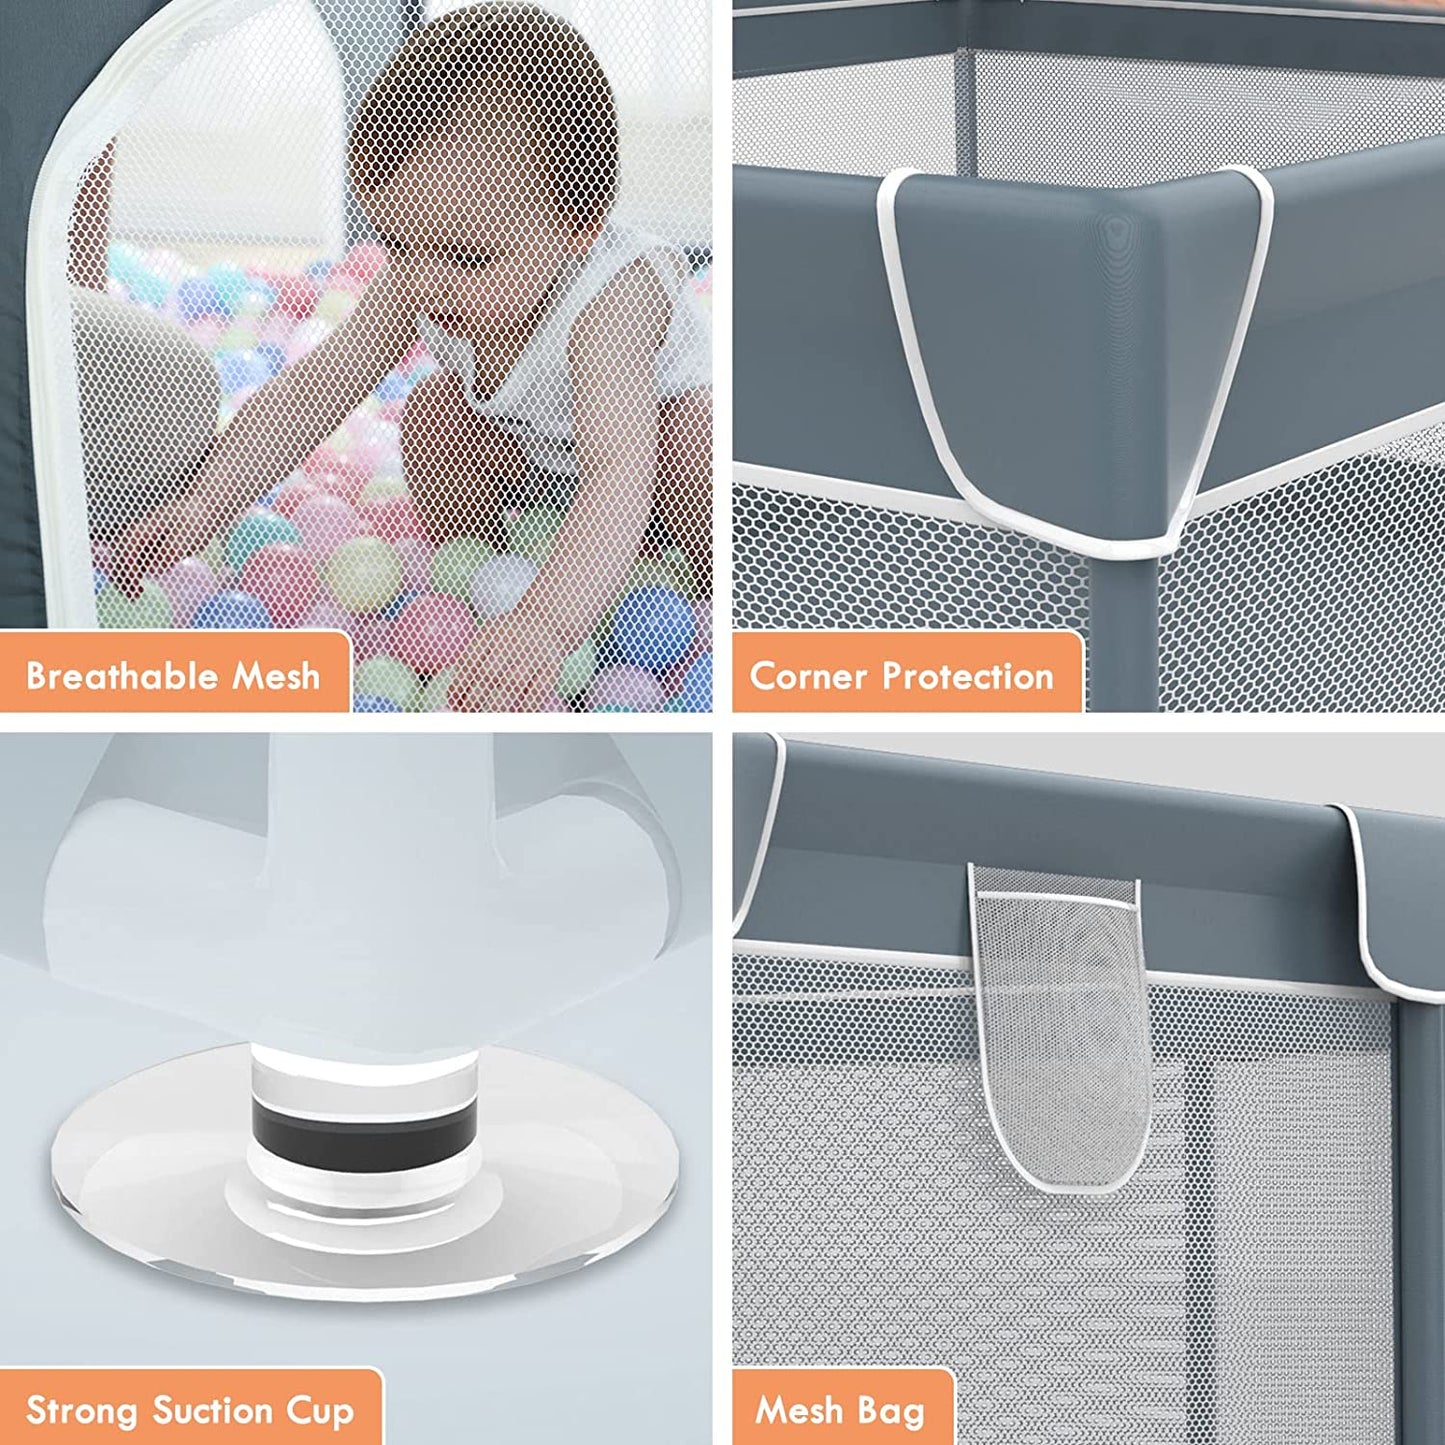 Limited Space Baby Play Pen with Gate and Breathable Mesh Fence - ToylandEU